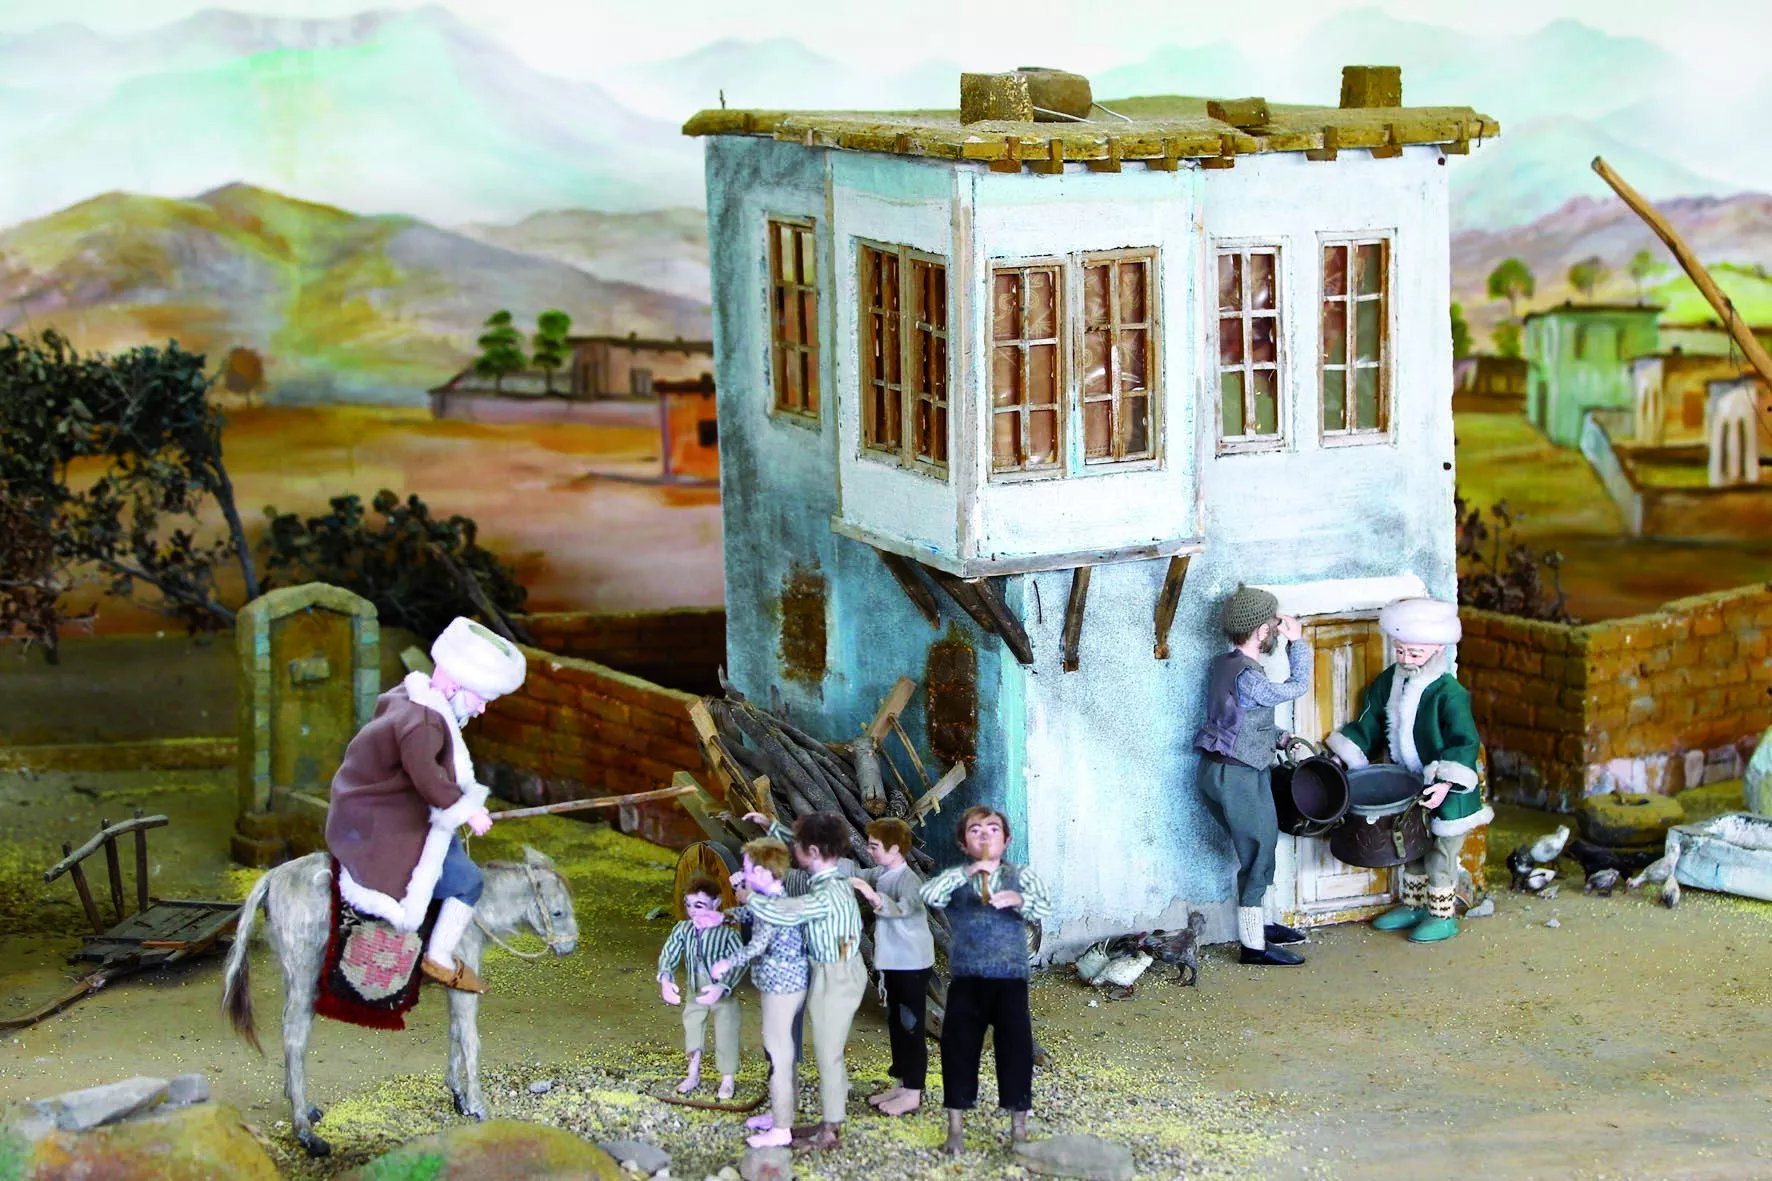 Cetin Model Village in Turkey, Central Asia | Museums - Rated 3.6